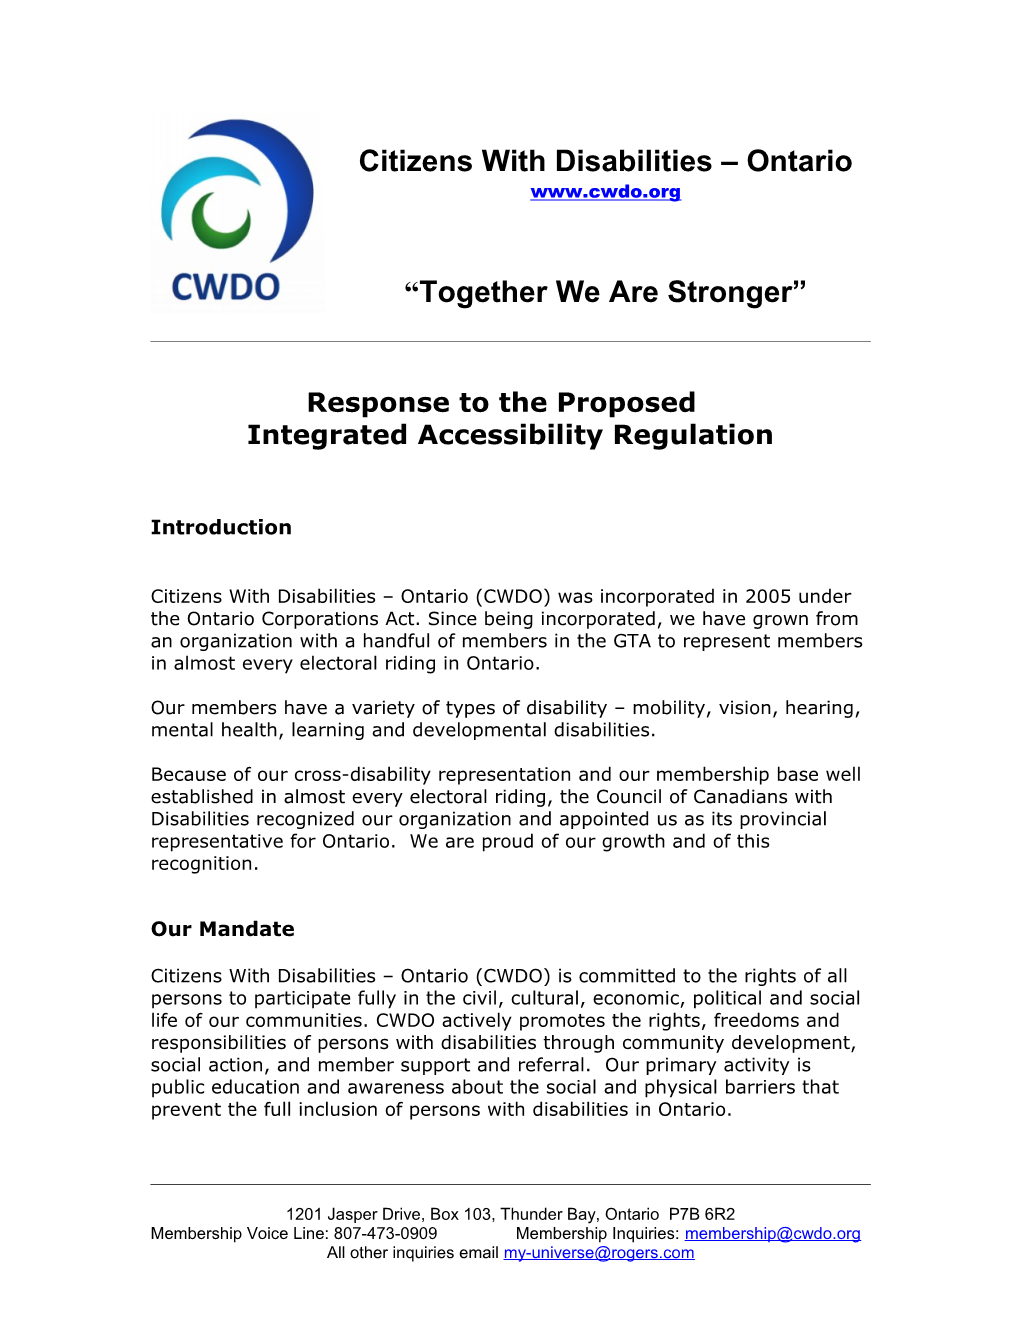 Citizens with Disabilities Ontario